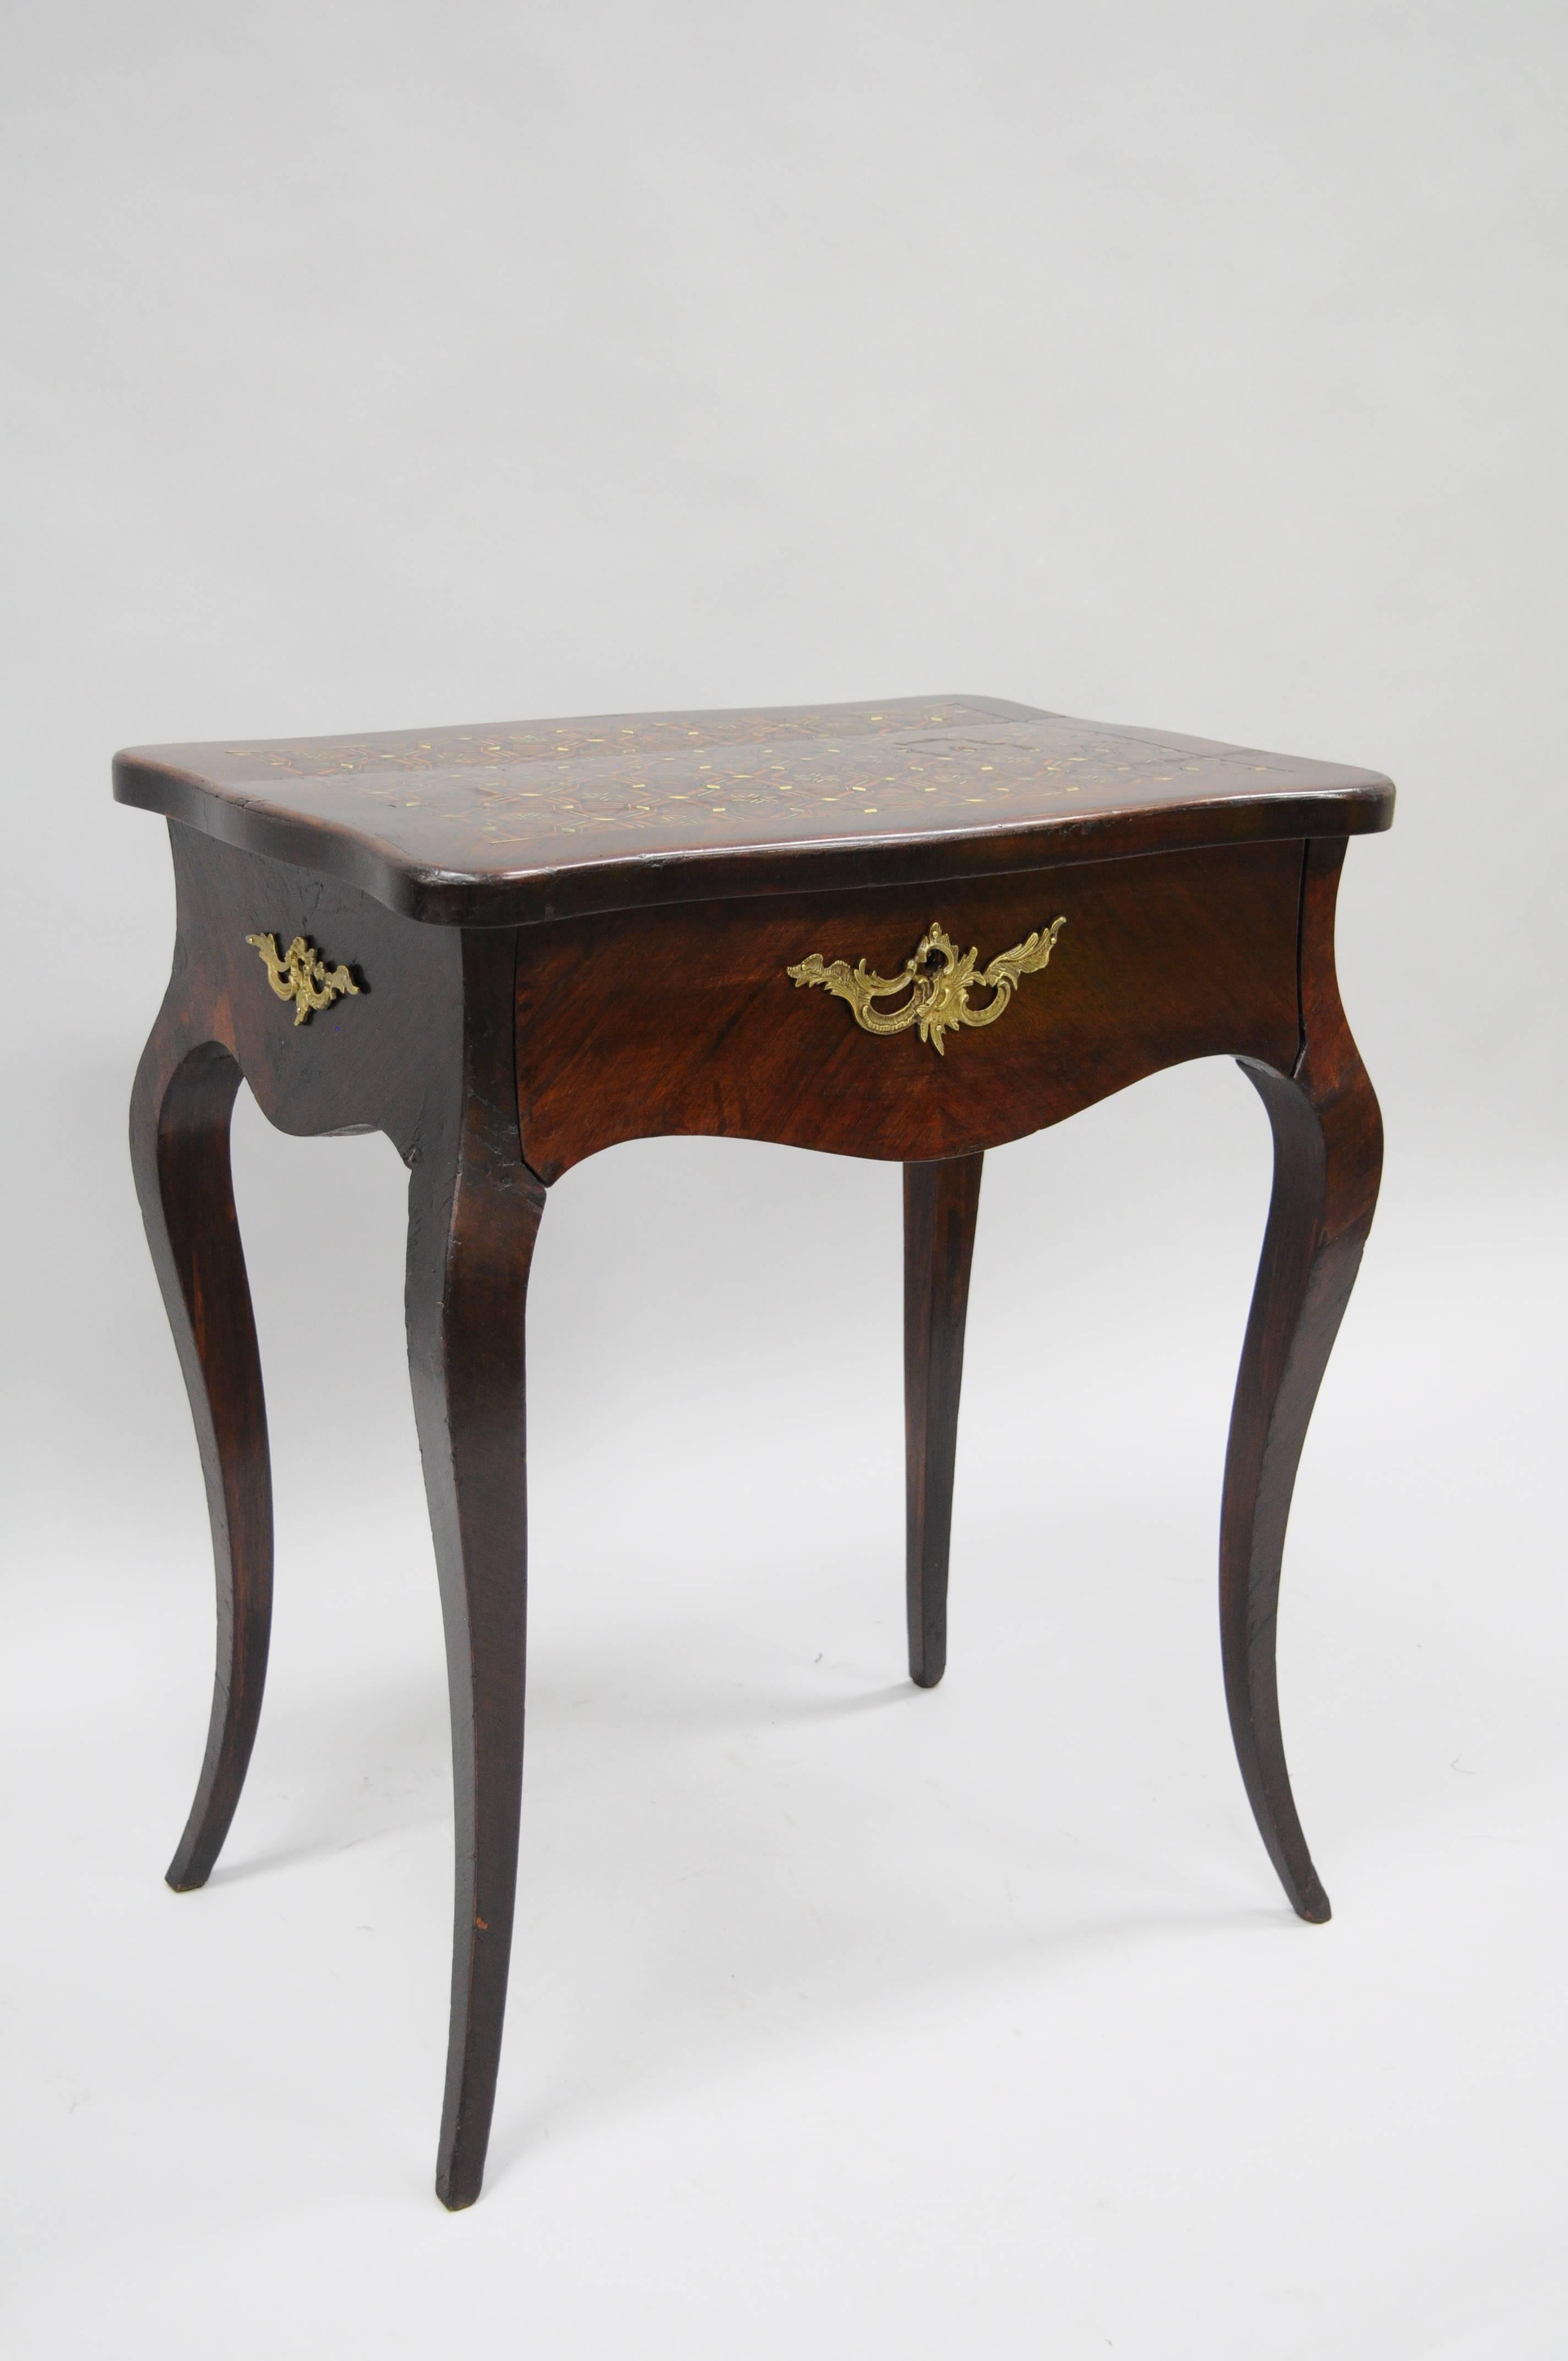 Antique 19th century French Napoleon III rosewood sewing table with ornate brass and mother-of-pearl marquetry inlaid top. Item features shapely cabriole legs, beautiful rosewood veneers, dovetailed central drawer and bronze ormolu. The ornate top